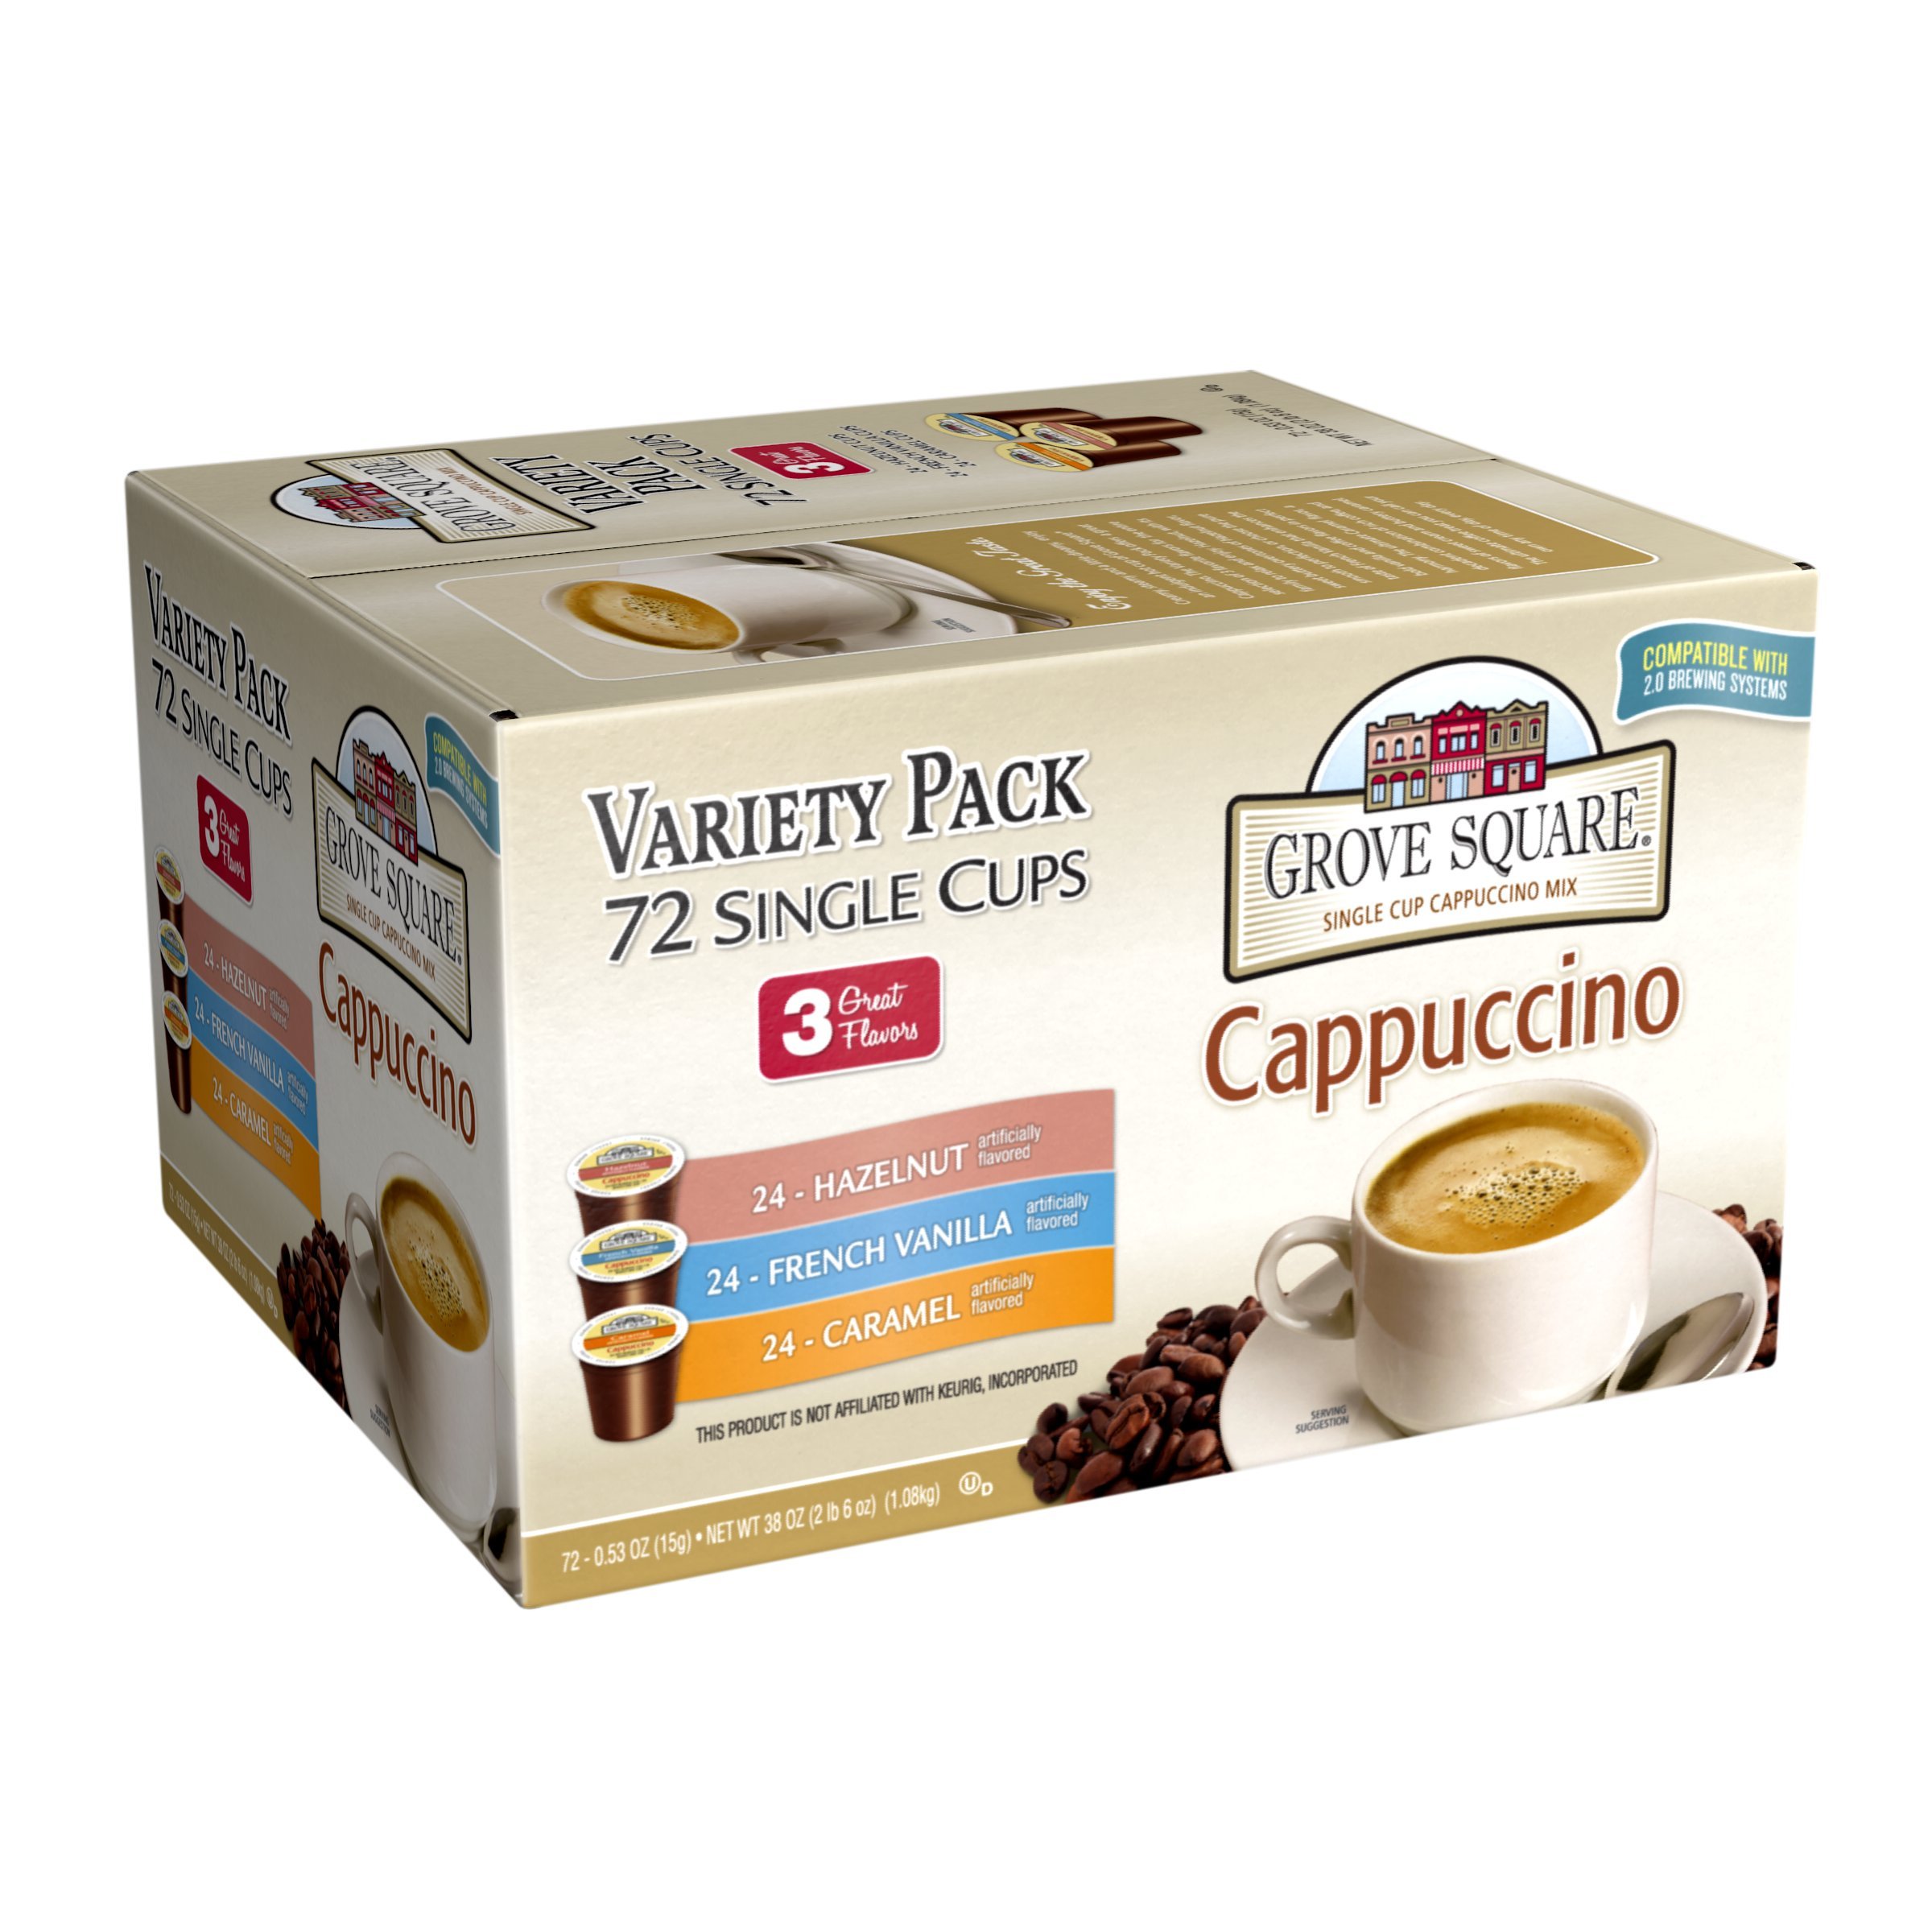 Grove Square Cappuccino Variety Pack